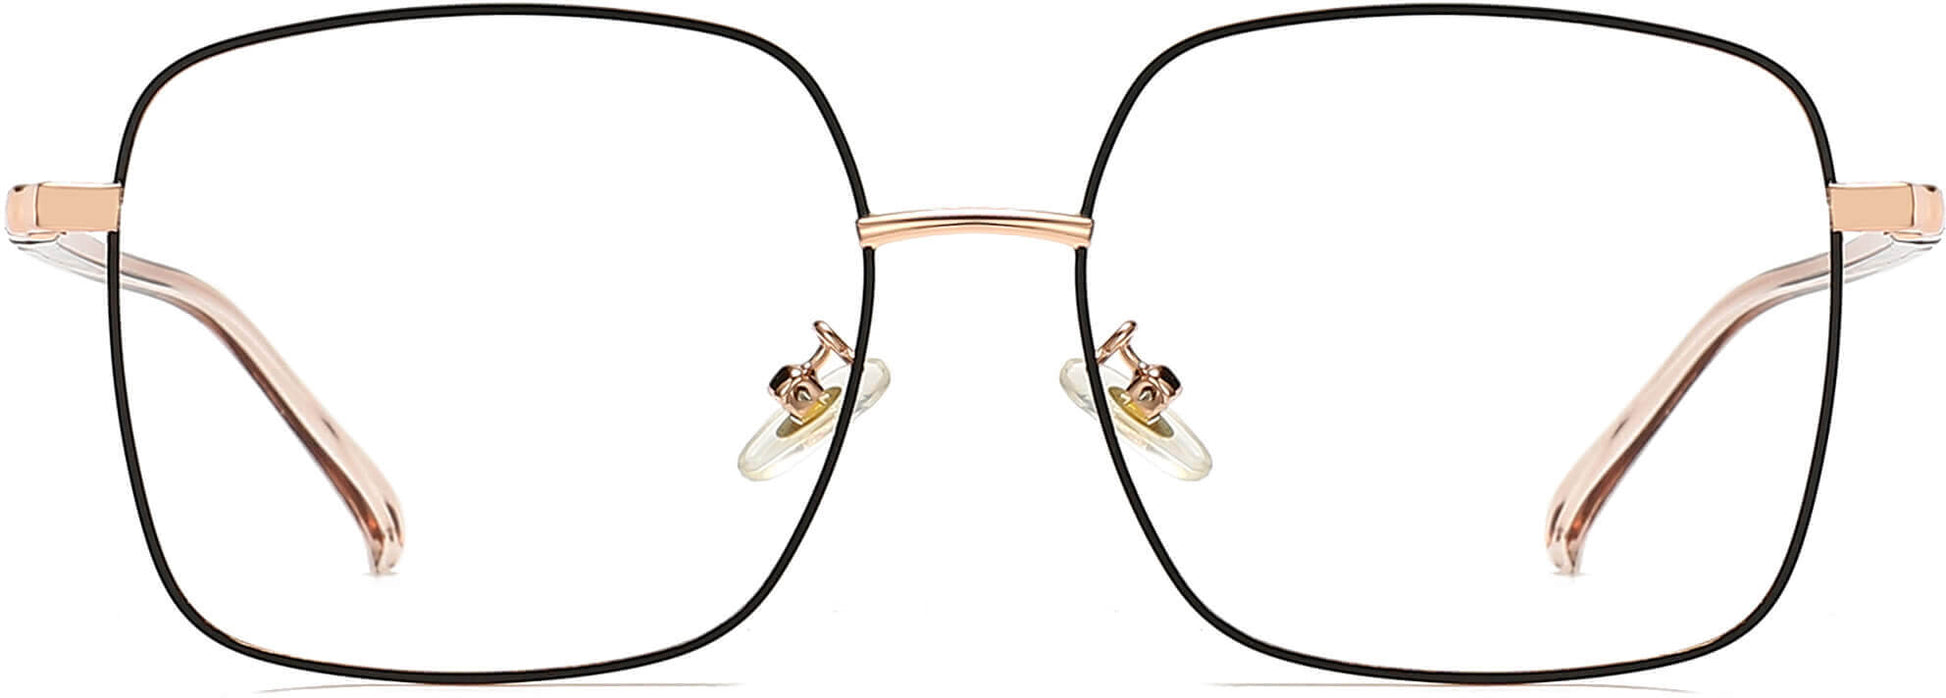 Nylah Square Black Eyeglasses from ANRRI, front view